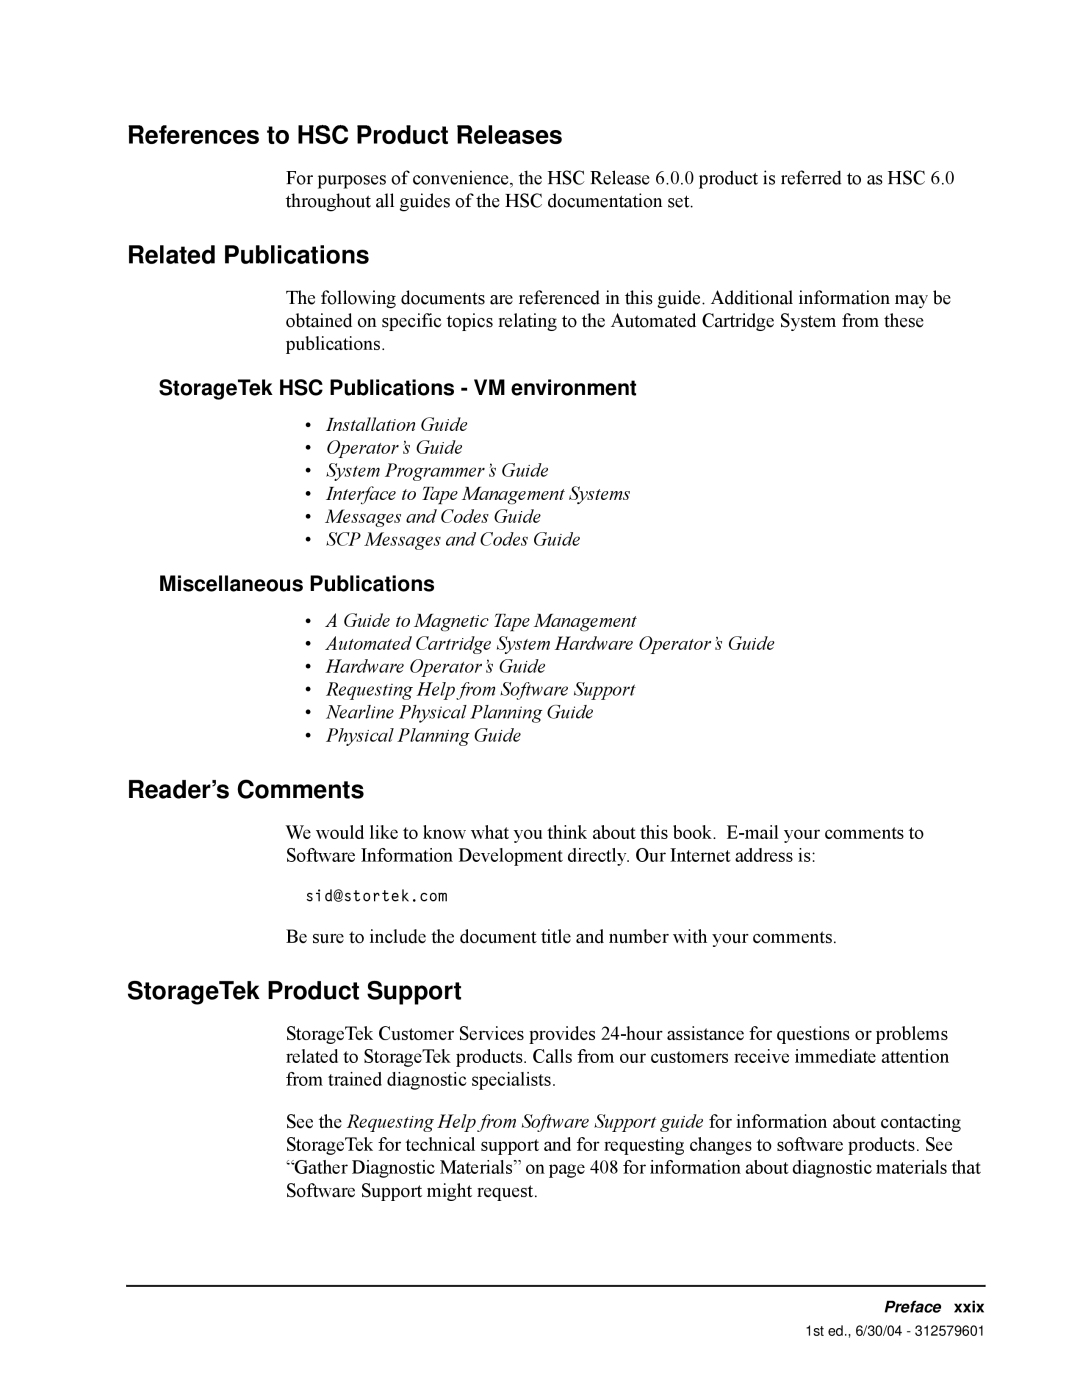 StorageTek 6 manual References to HSC Product Releases, Related Publications, Reader’s Comments, StorageTek Product Support 